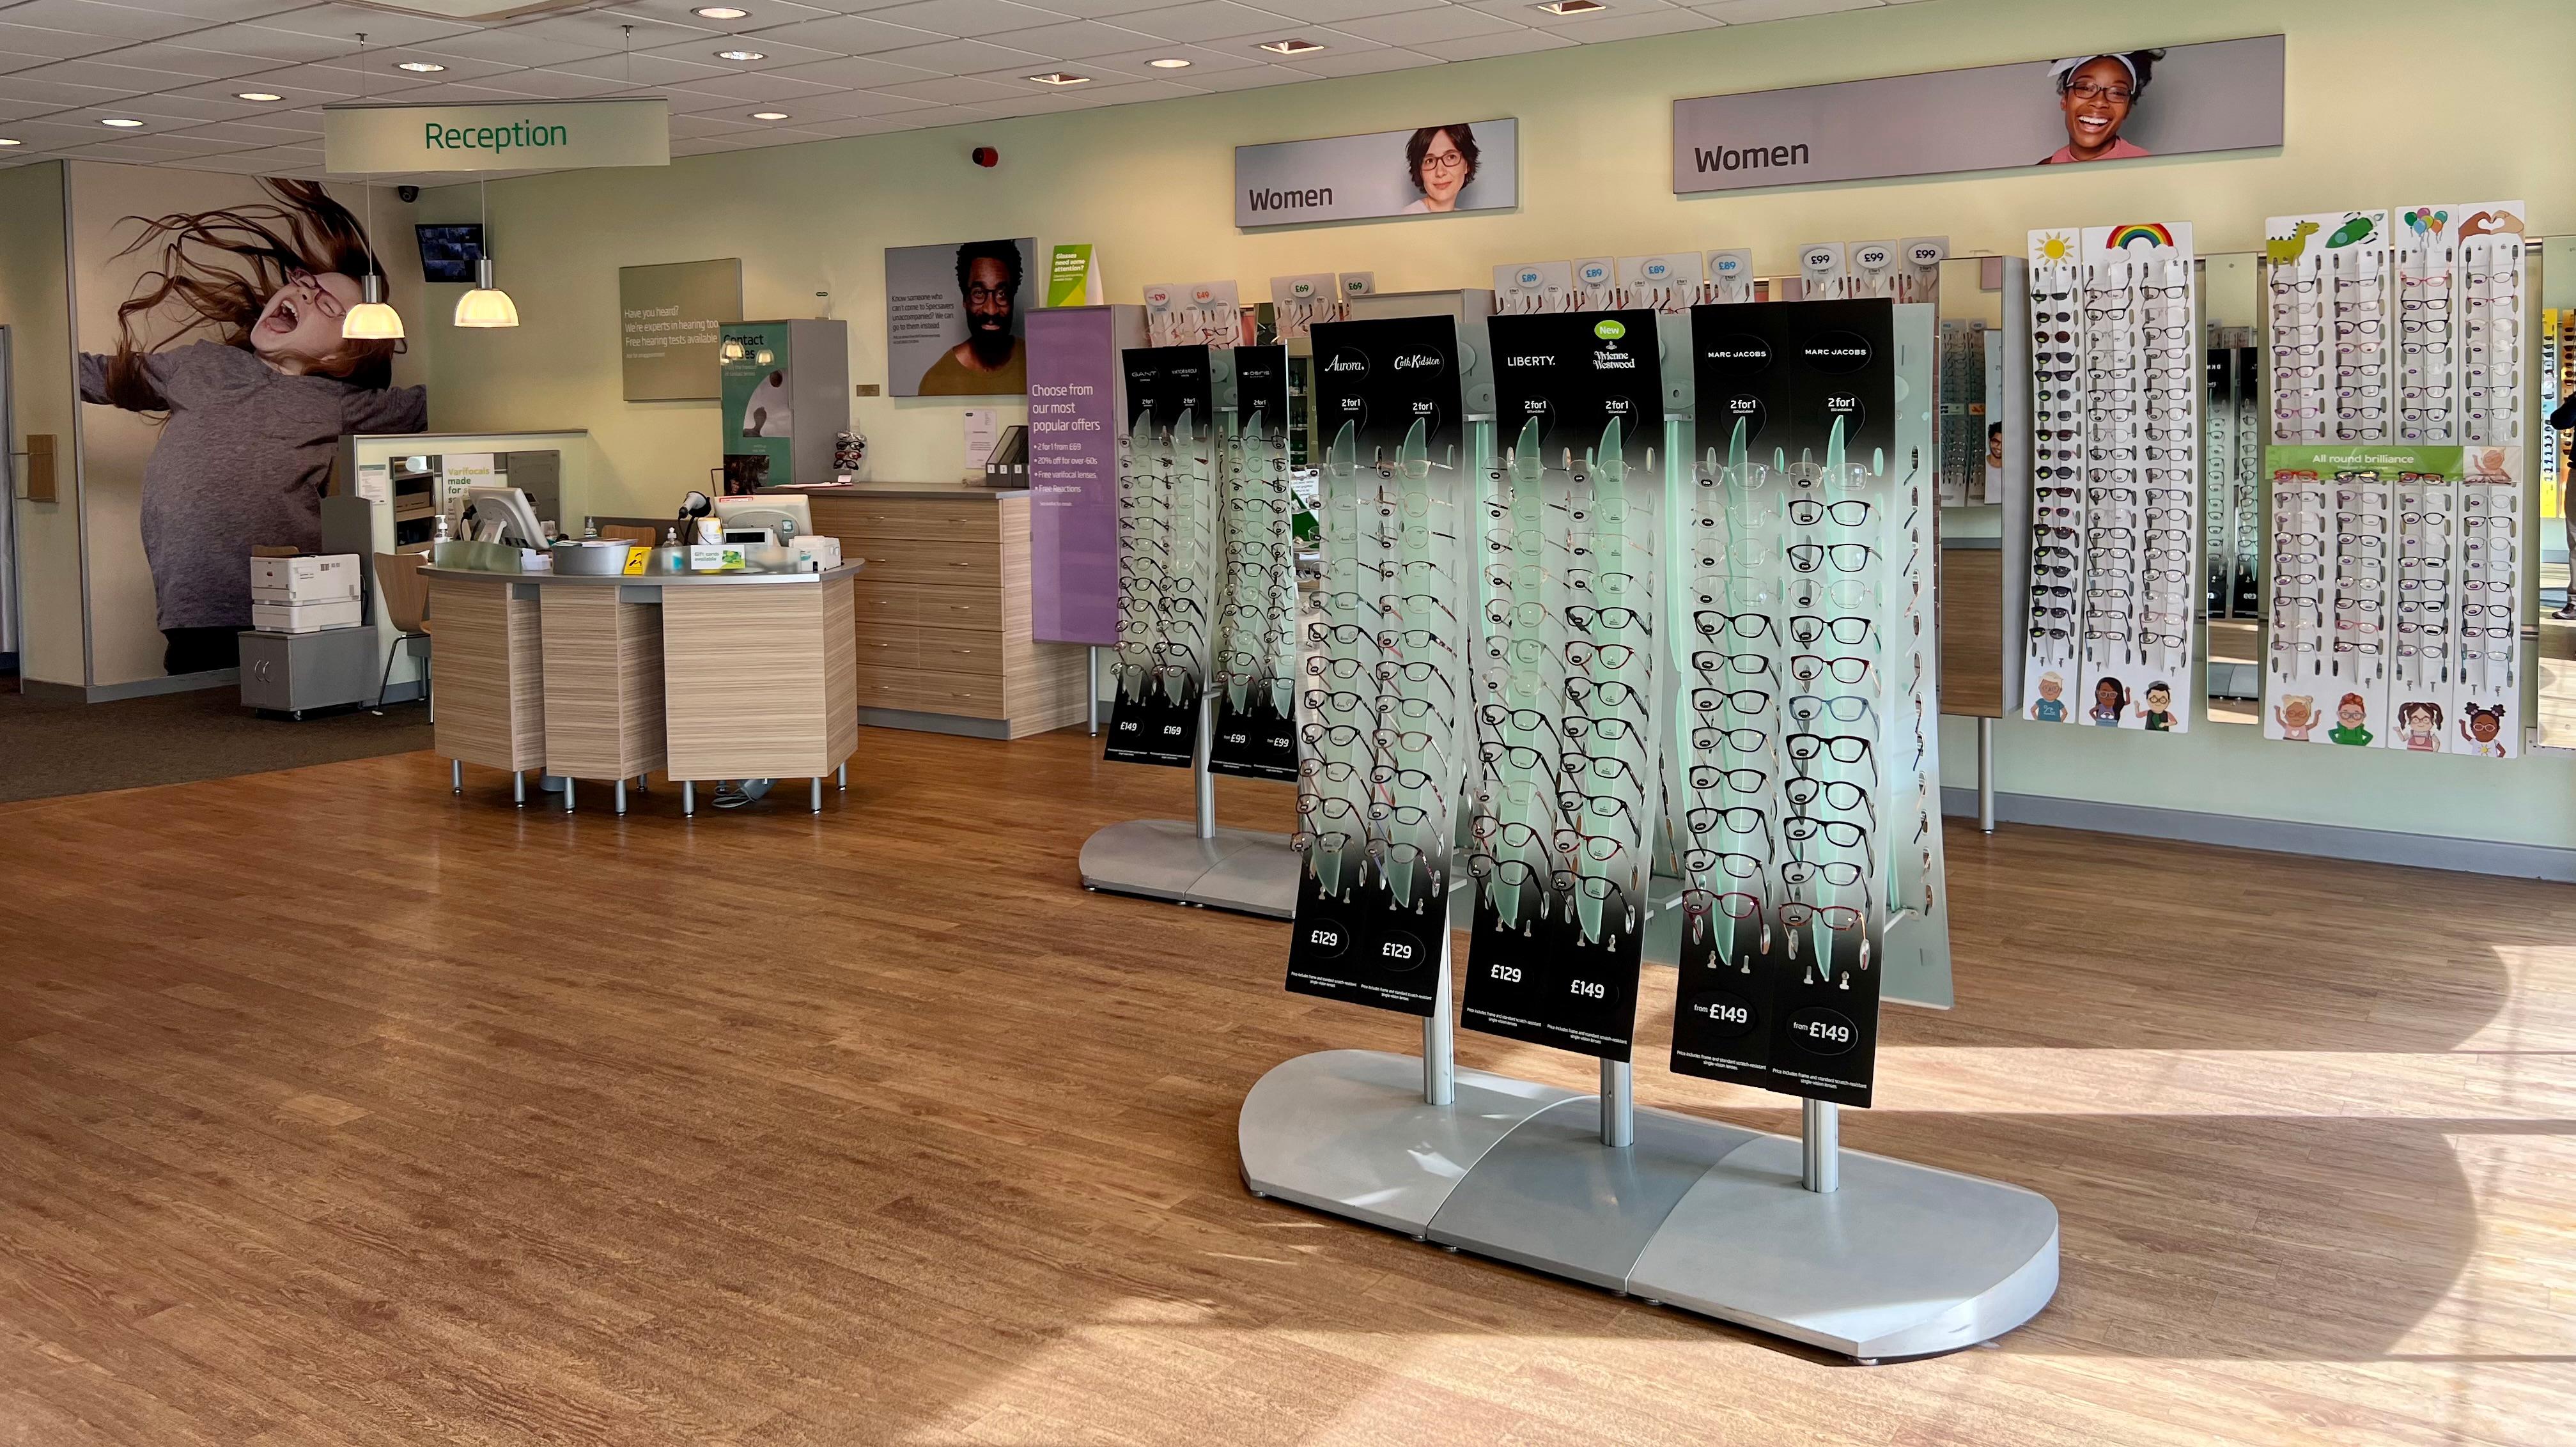 Images Specsavers Opticians and Audiologists - Bradford Idle